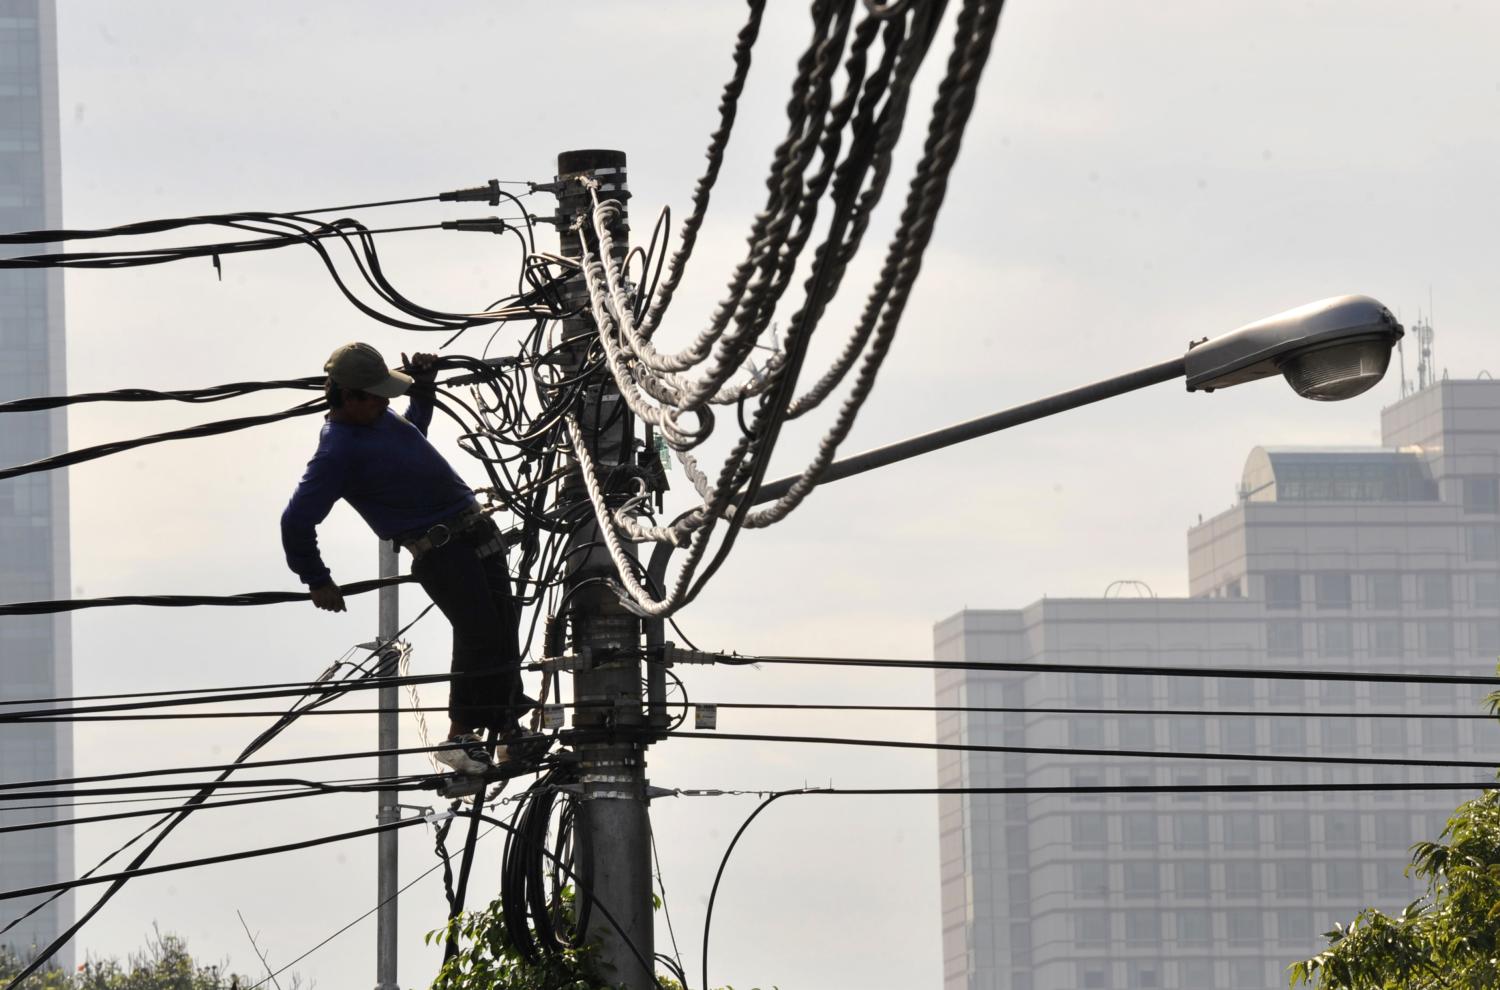 A lineman from the state-electricity company PLN installs new power cables in Jakarta (Romeo Gacad/AFP via Getty Images)